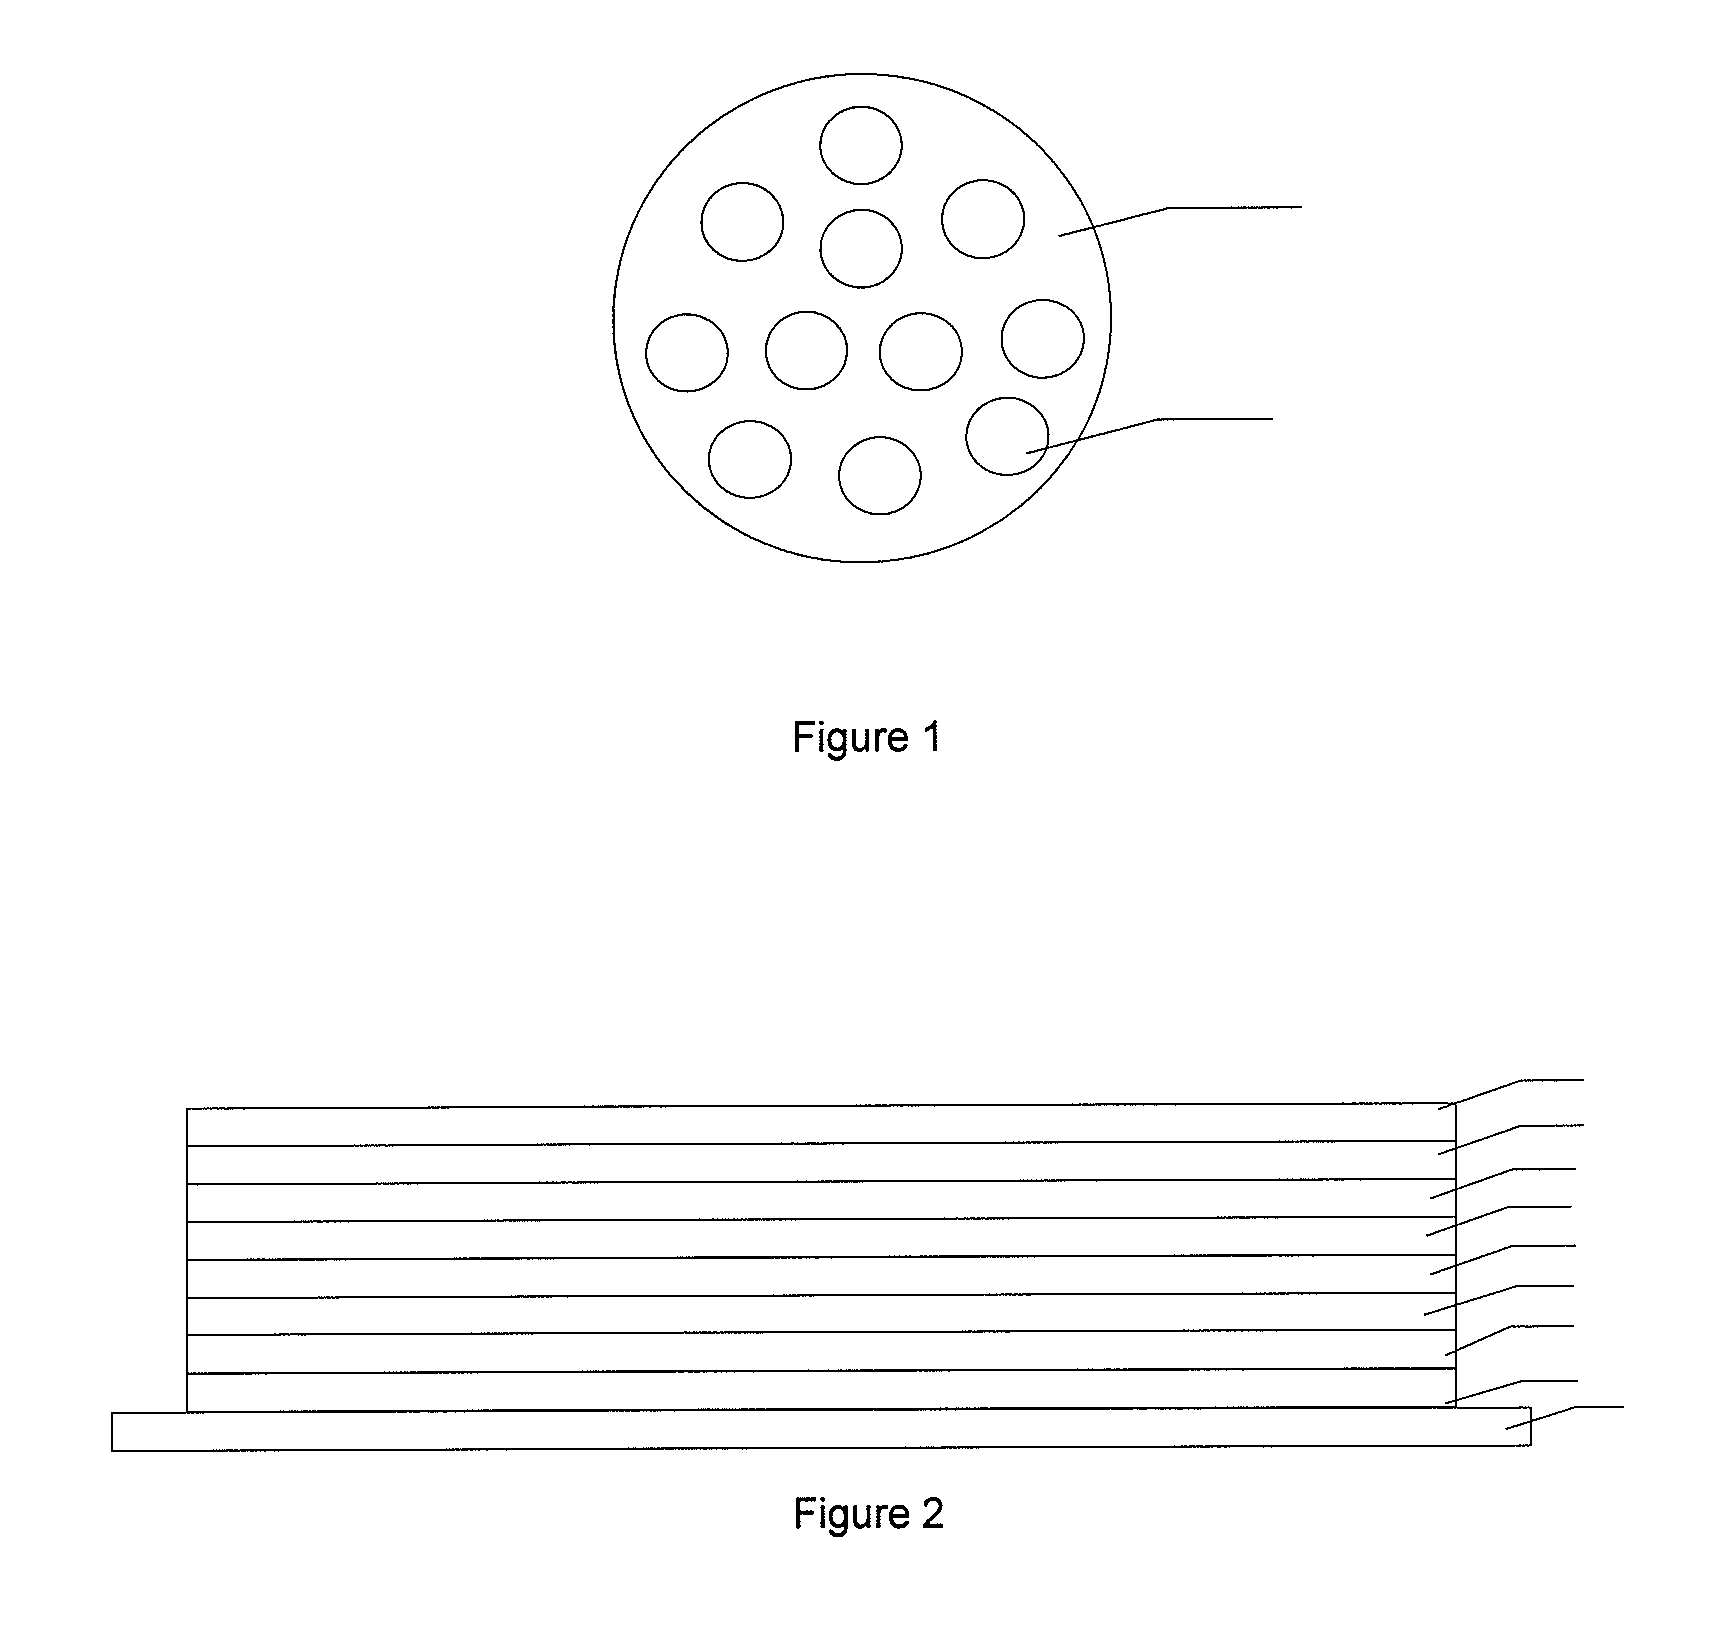 Light emitting microcapsule, method of preparing the same and OLED display device comprising the same